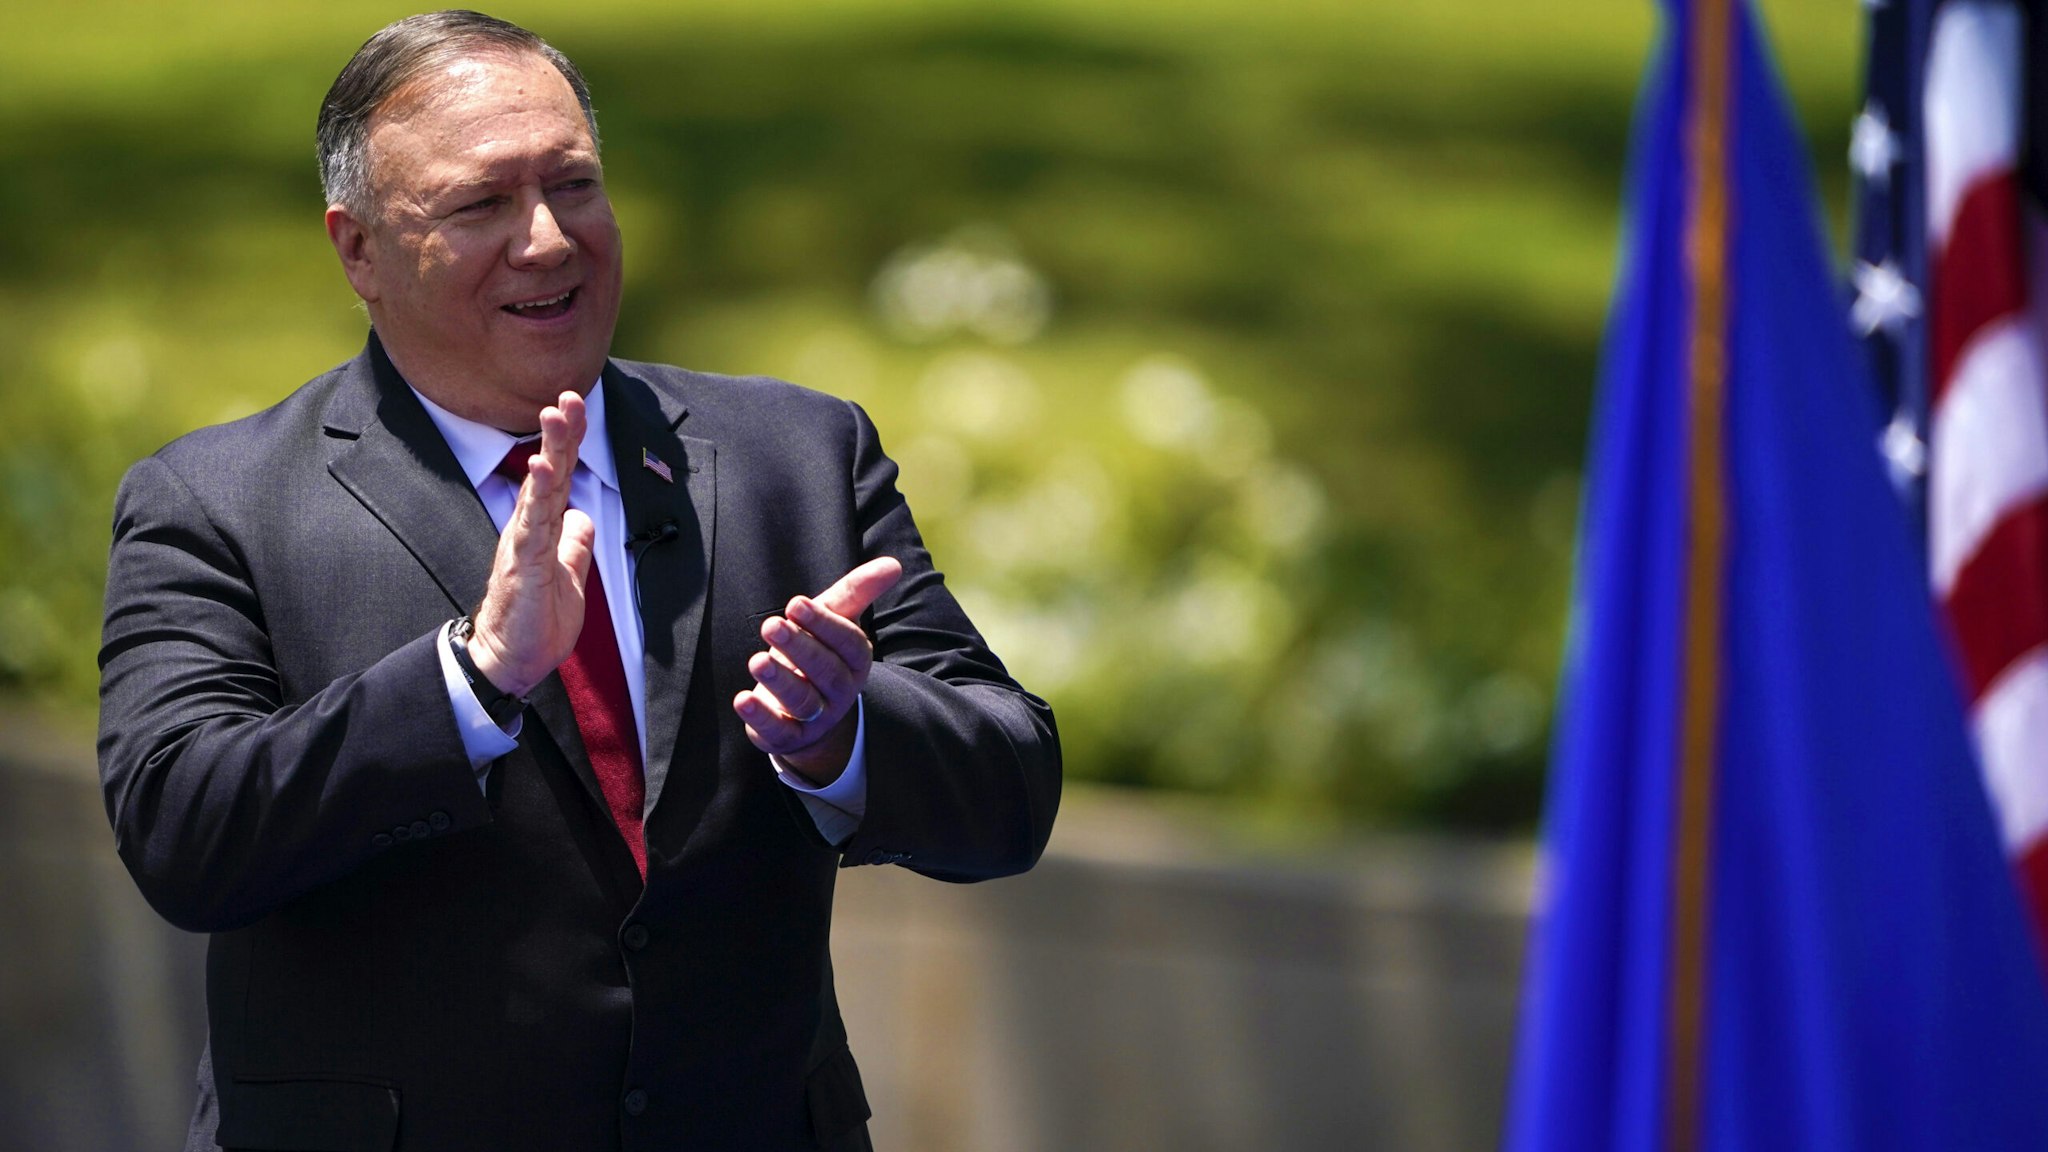 US Secretary of State Mike Pompeo claps as he speaks at the Richard Nixon Presidential Library, July 23, 2020, in Yorba Linda, California.